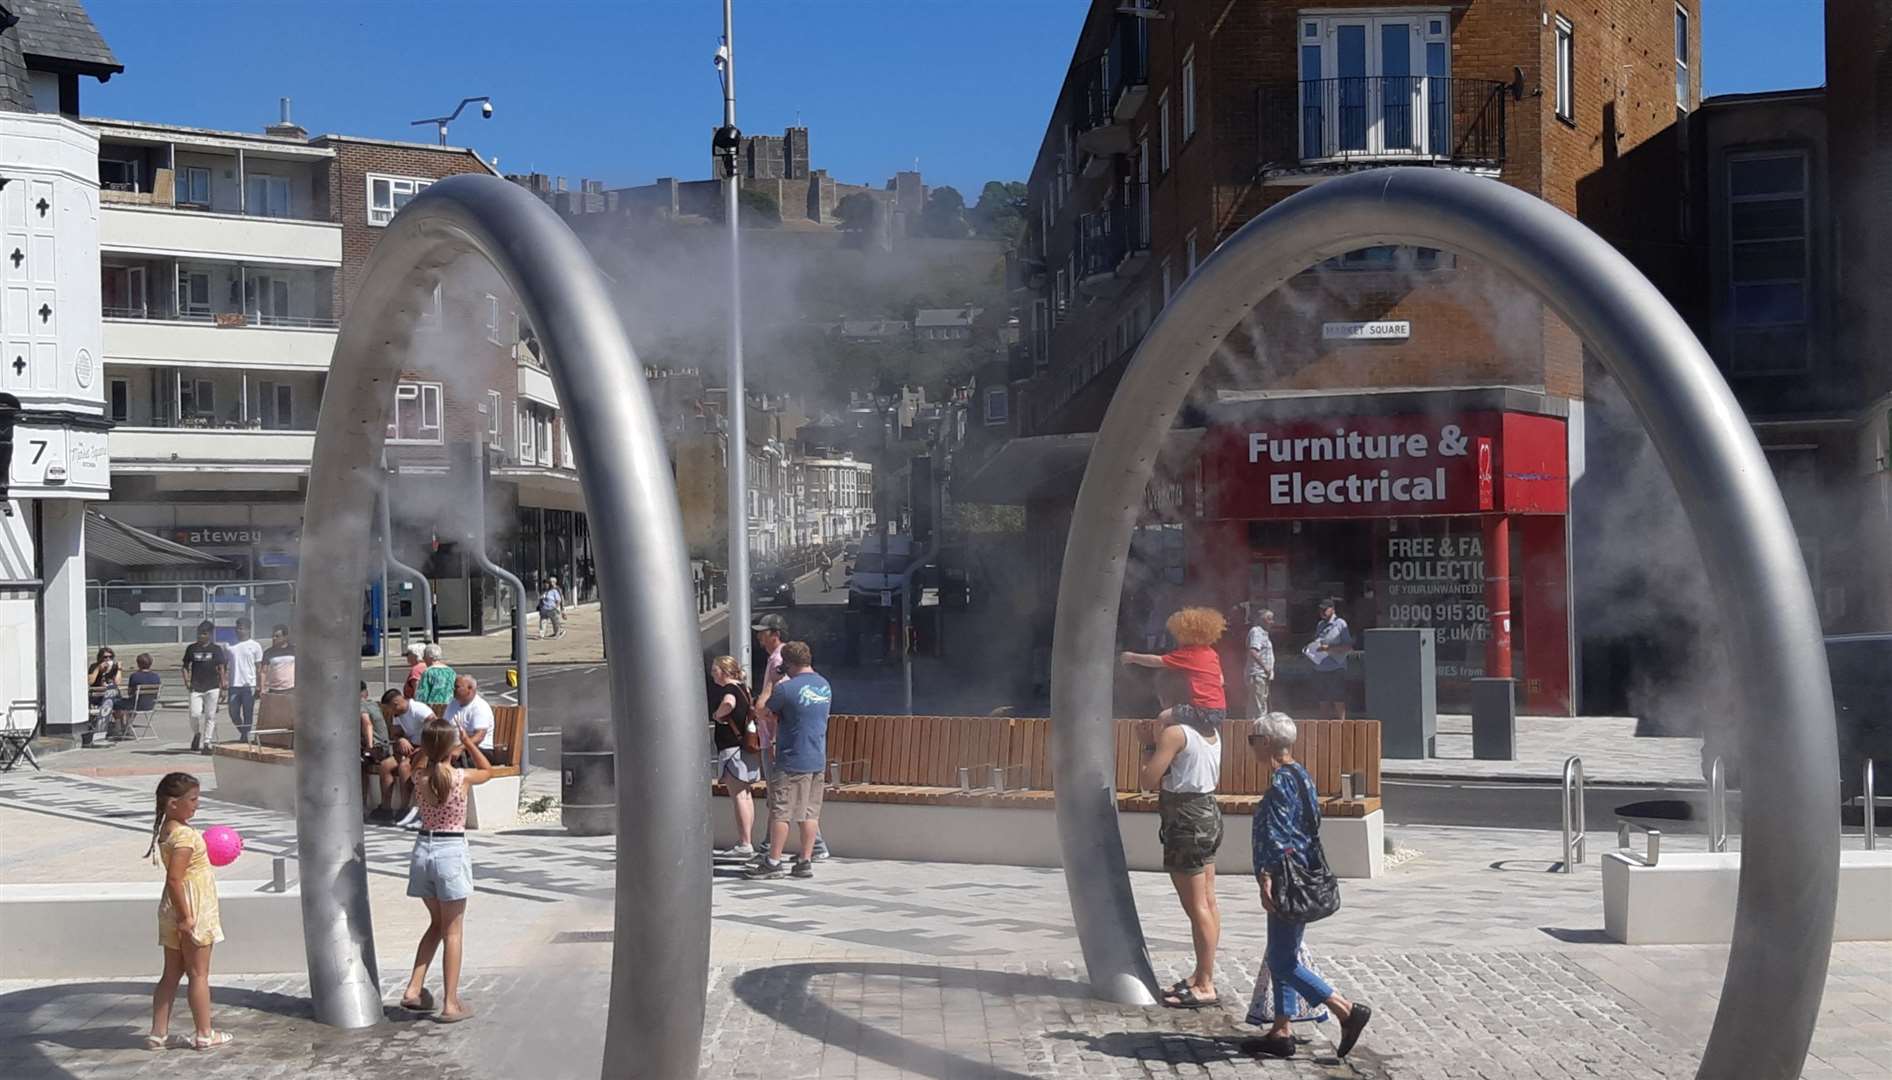 The cooling water feature at Market Square. Picture: Sam Lennon